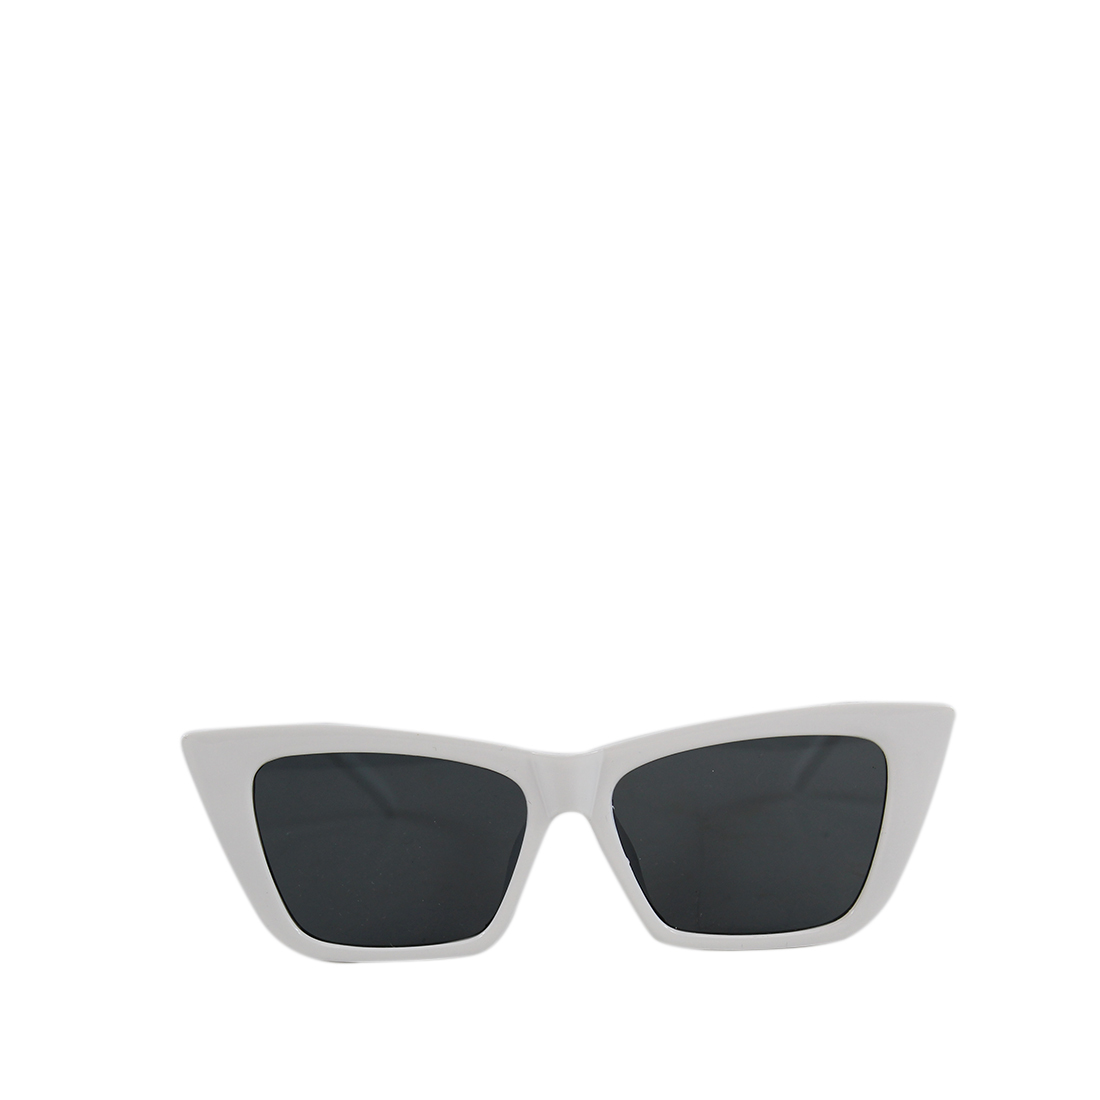 * Angled square cat eye sunglasses with